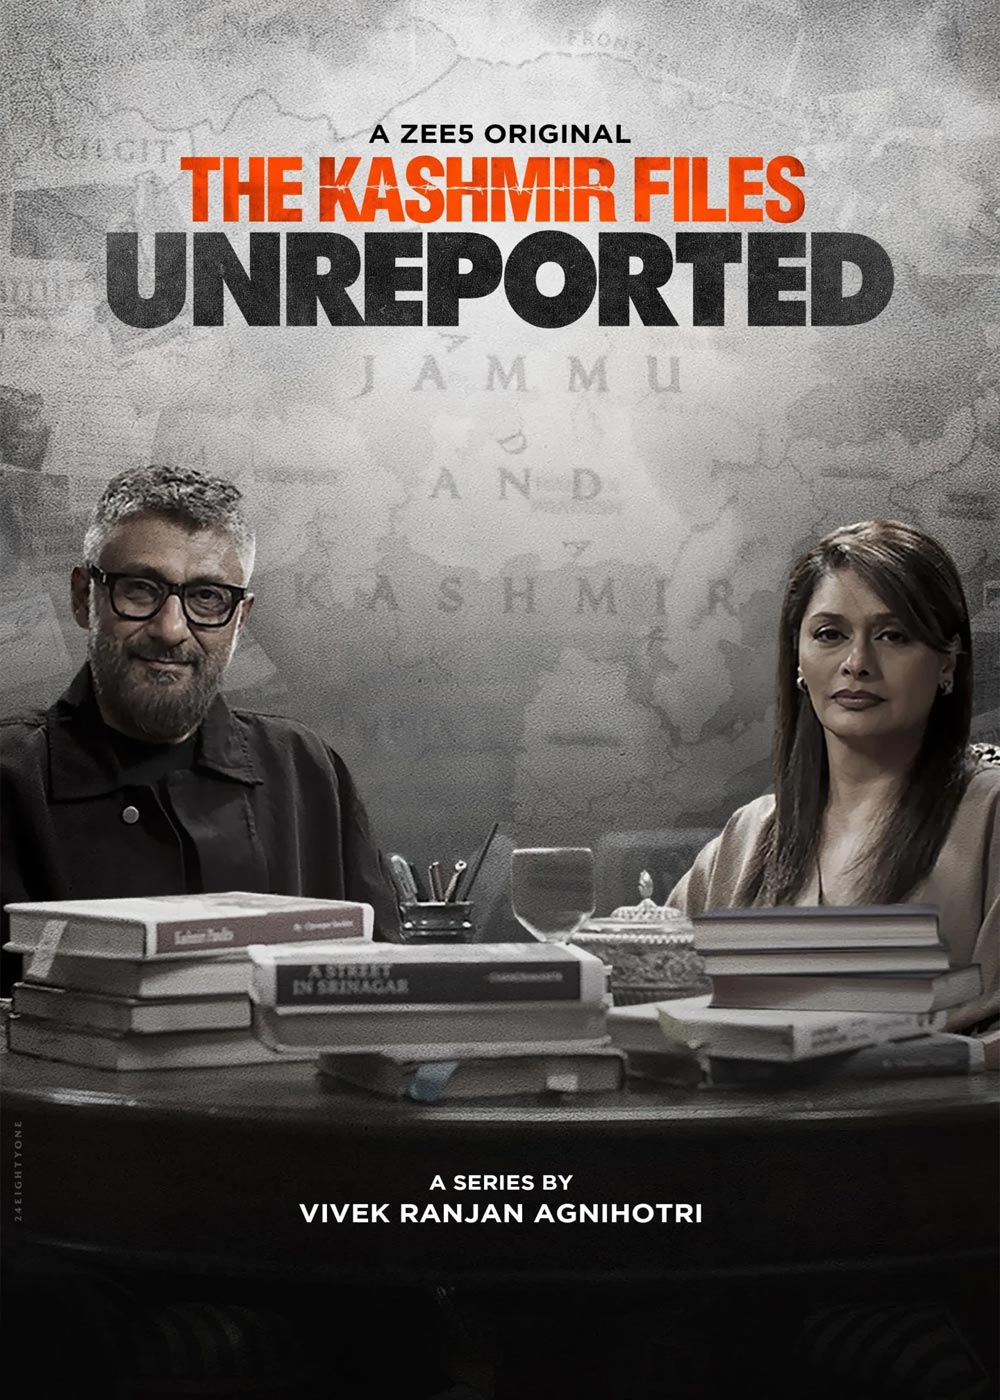 The Kashmir Files: Unreported (2023) 720p-480p HEVC HDRip Hindi S01 Complete Web Series x265 ESubs